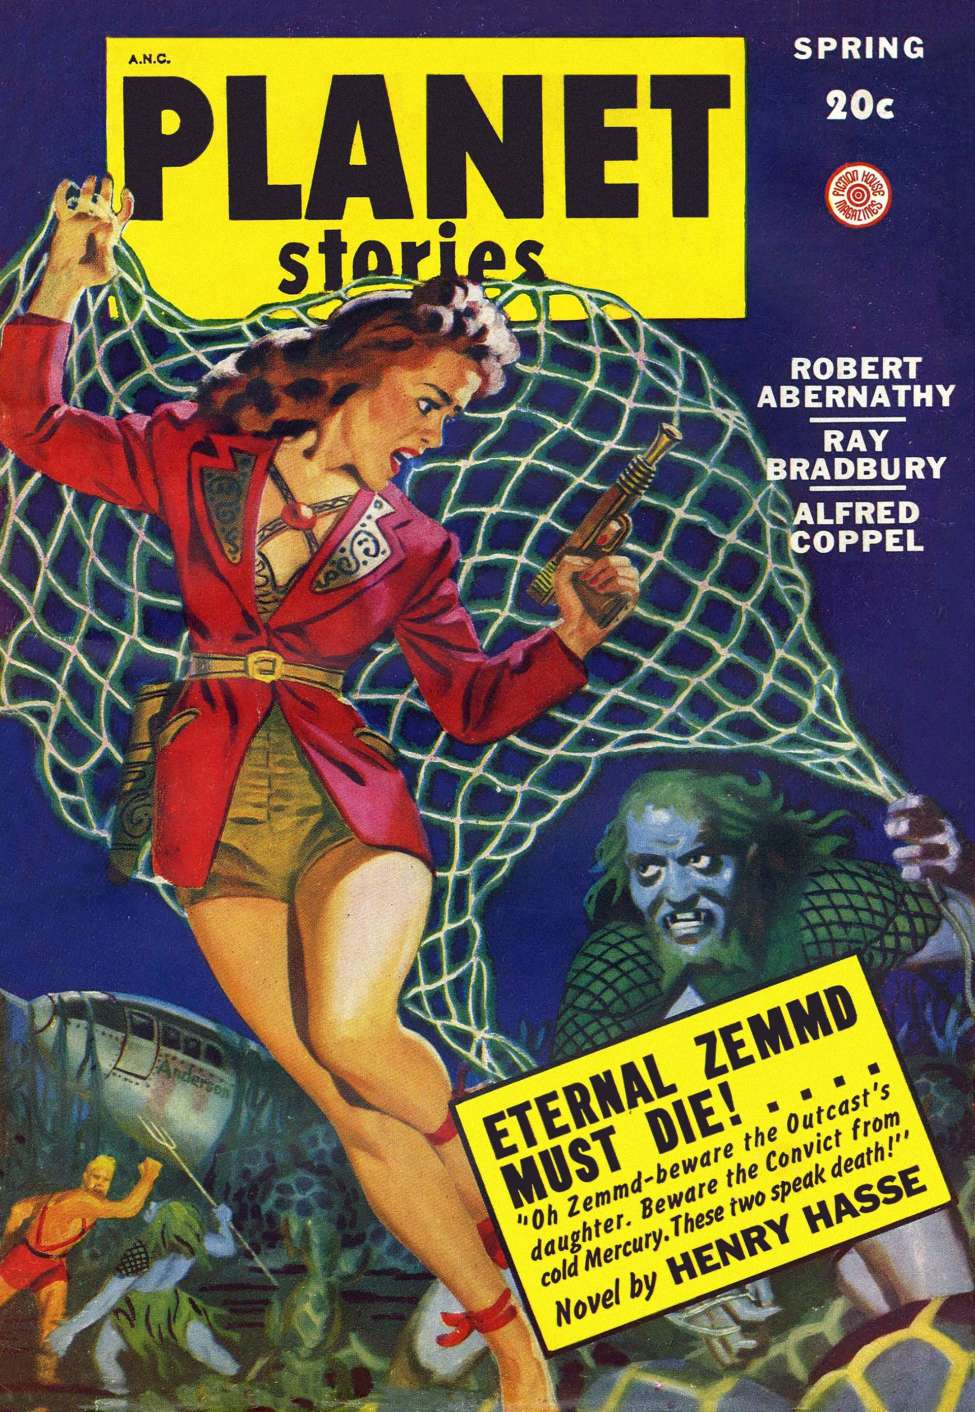 Book Cover For Planet Stories v4 2 - Eternal Zemmd Must Die! - Henry Hasse